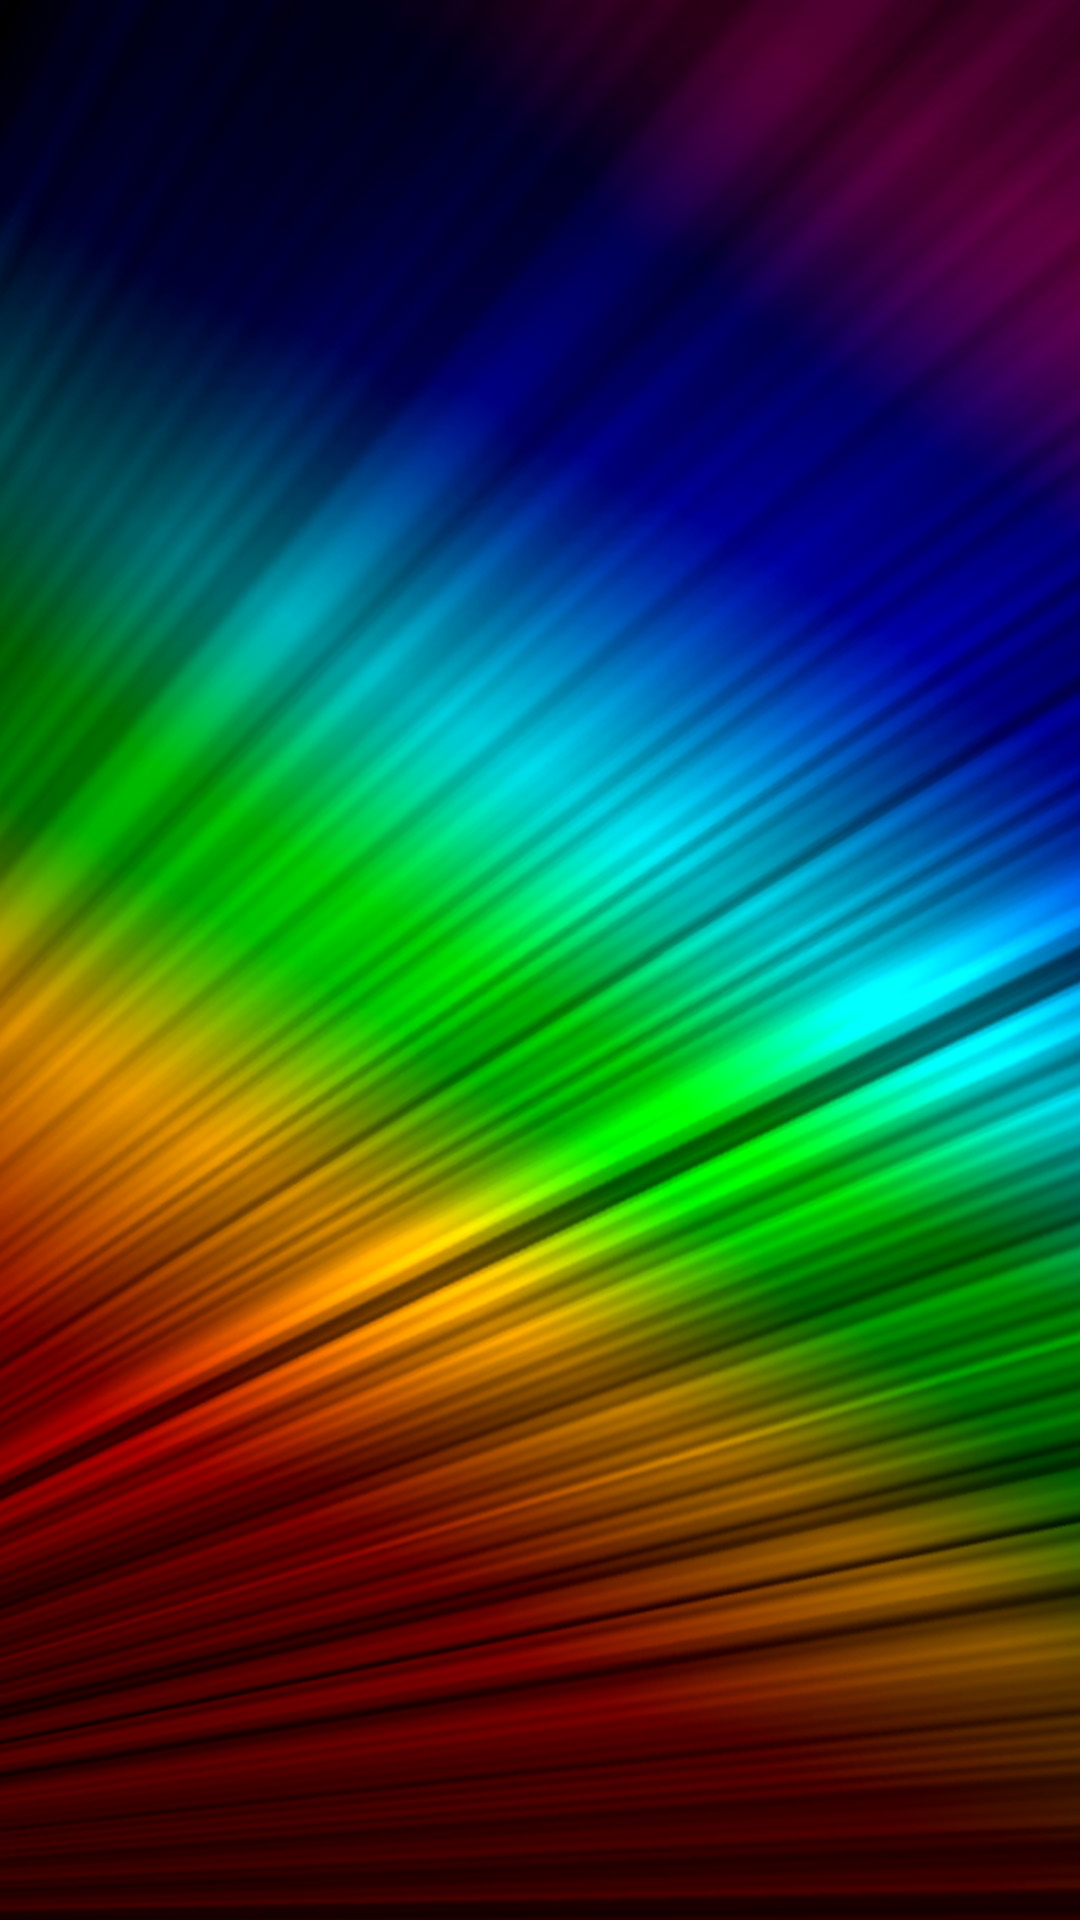 Abstract Iphone Images - Backgrounds Rich Colors - 1080x1920 Wallpaper -  